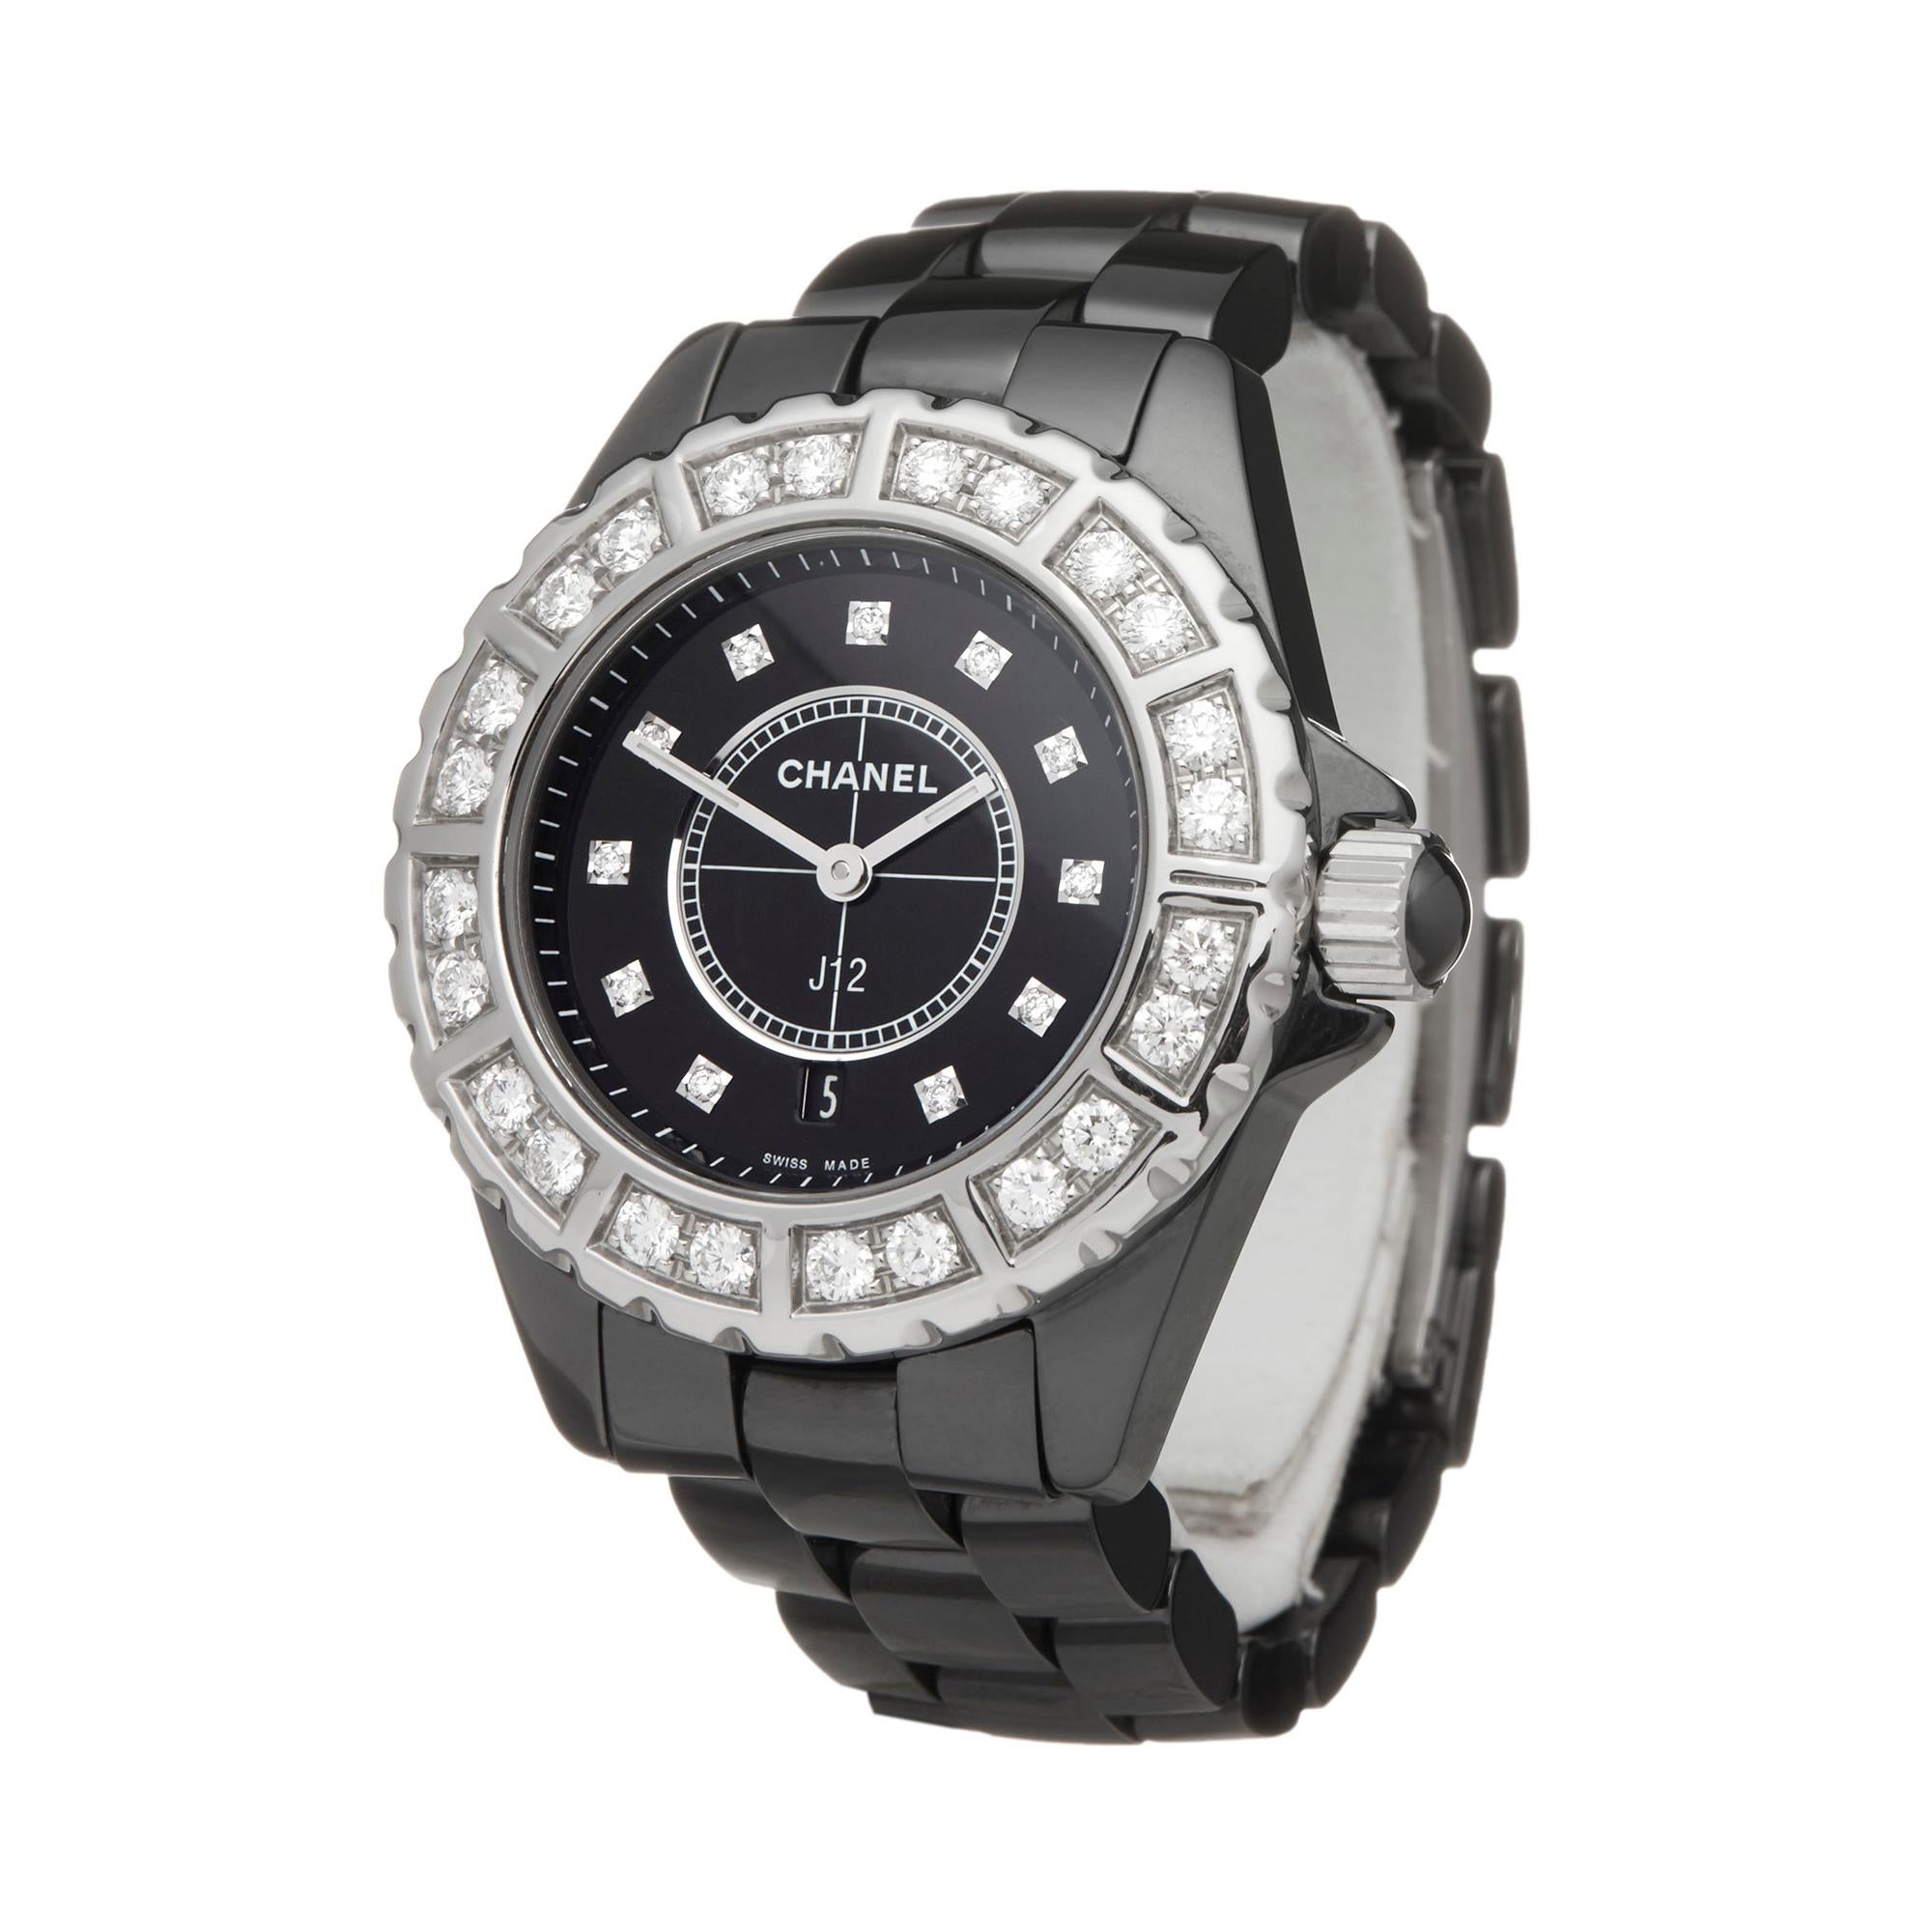 Reference: W6065
Manufacturer: Chanel
Model: J12
Model Reference: H2427
Age: Circa 2010's
Gender: Women's
Box and Papers: Box & Open Guarantee
Dial: Black Diamond
Glass: Sapphire Crystal
Movement: Quartz
Water Resistance: To Manufacturers